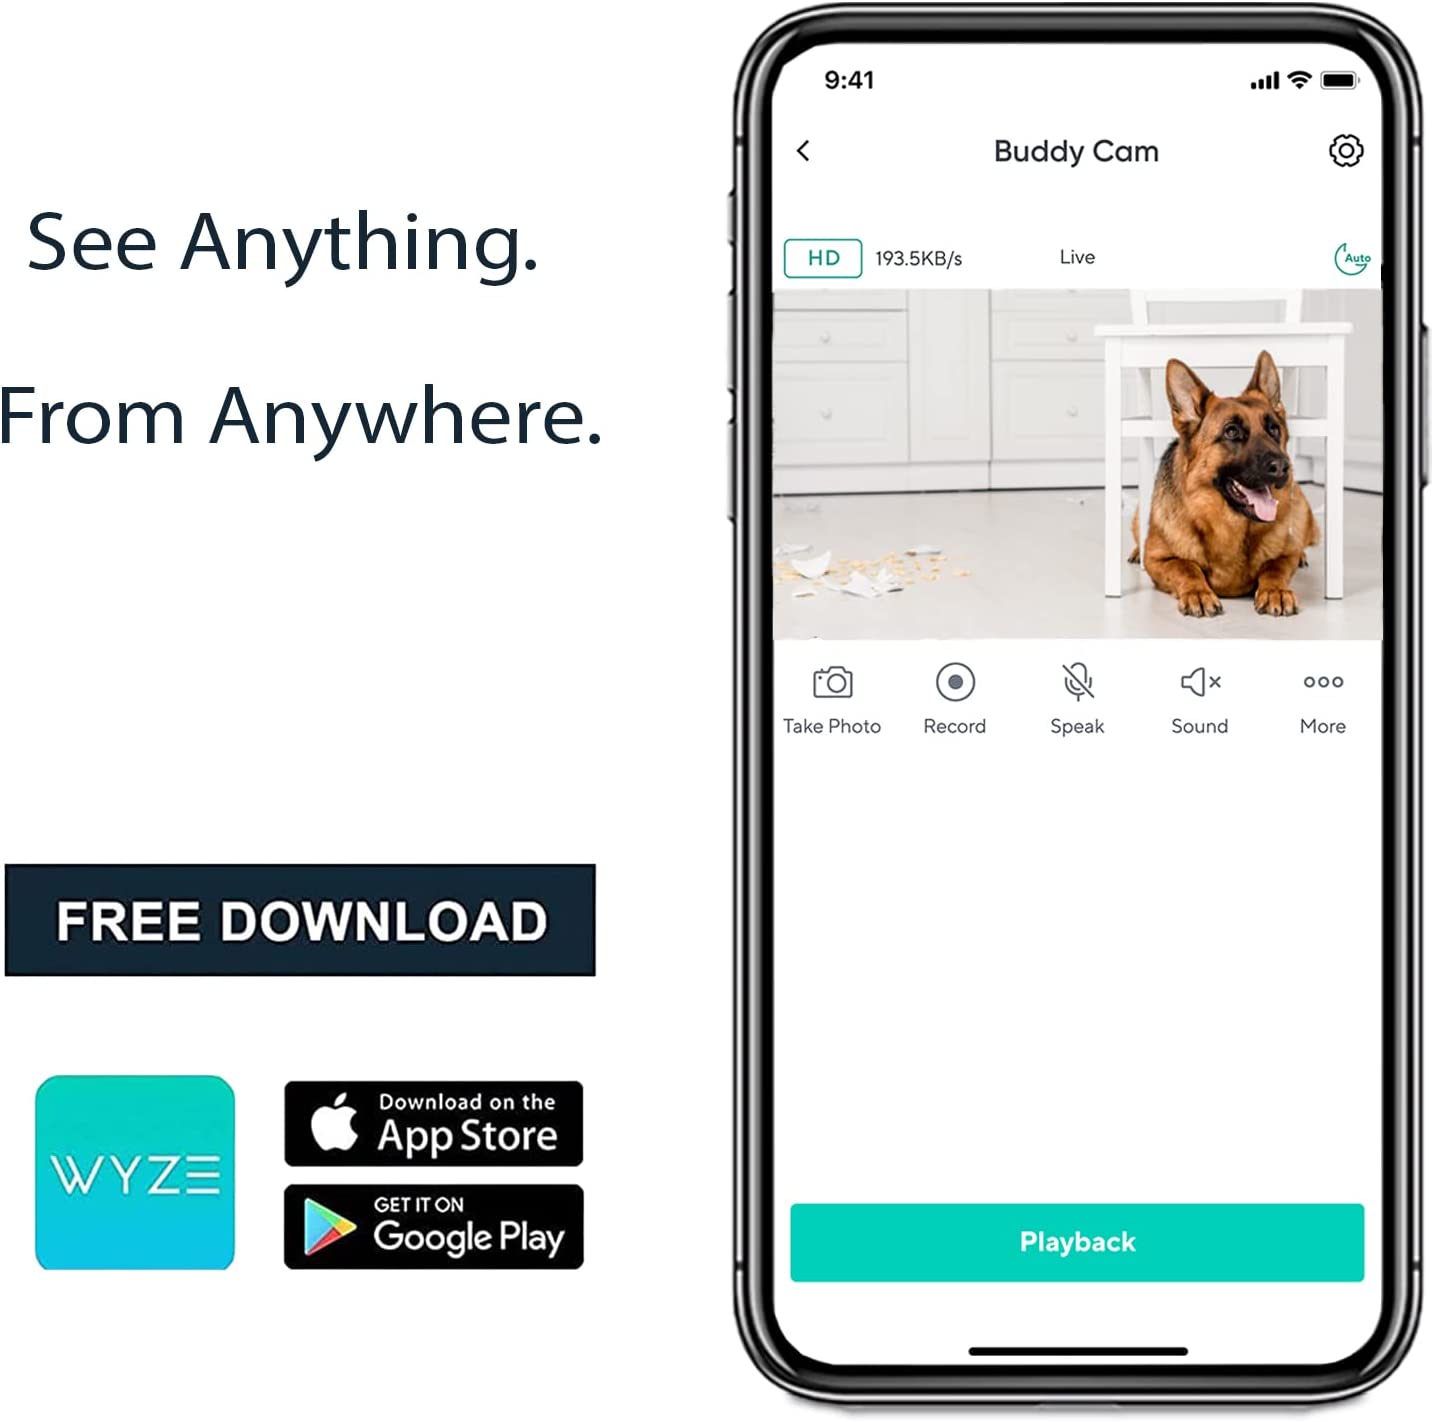 Smartphone with Wyze live view streaming dog. Text overlay "See anything. From Anywhere."